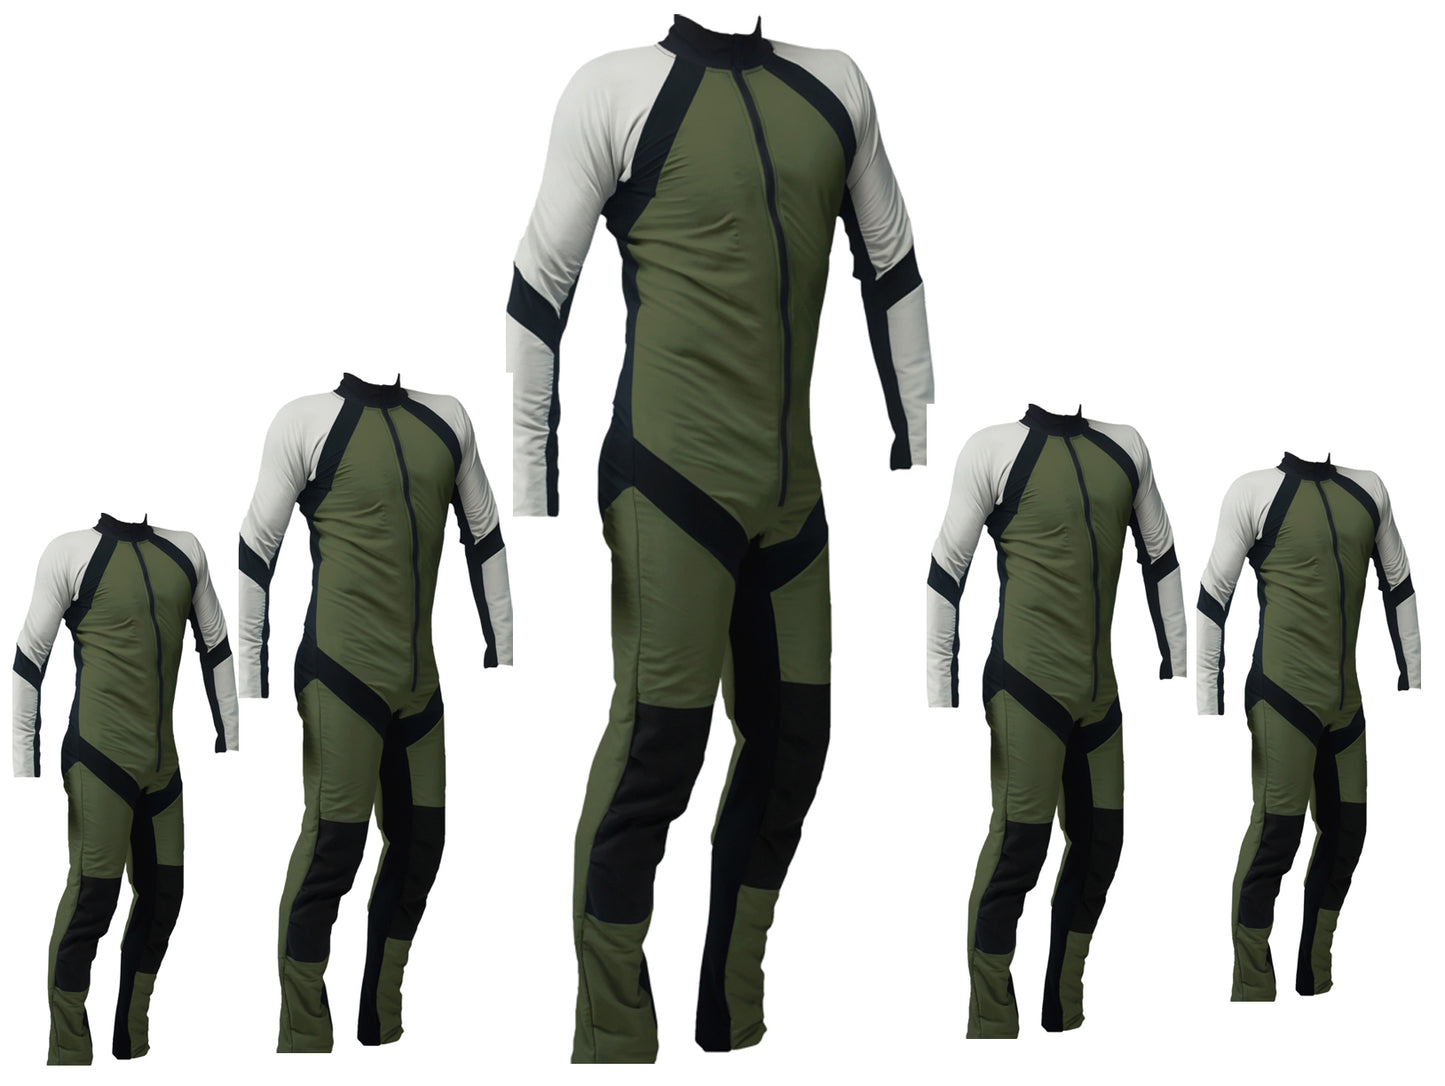 Freefly Skydiving in Lime Color Suit SE-09